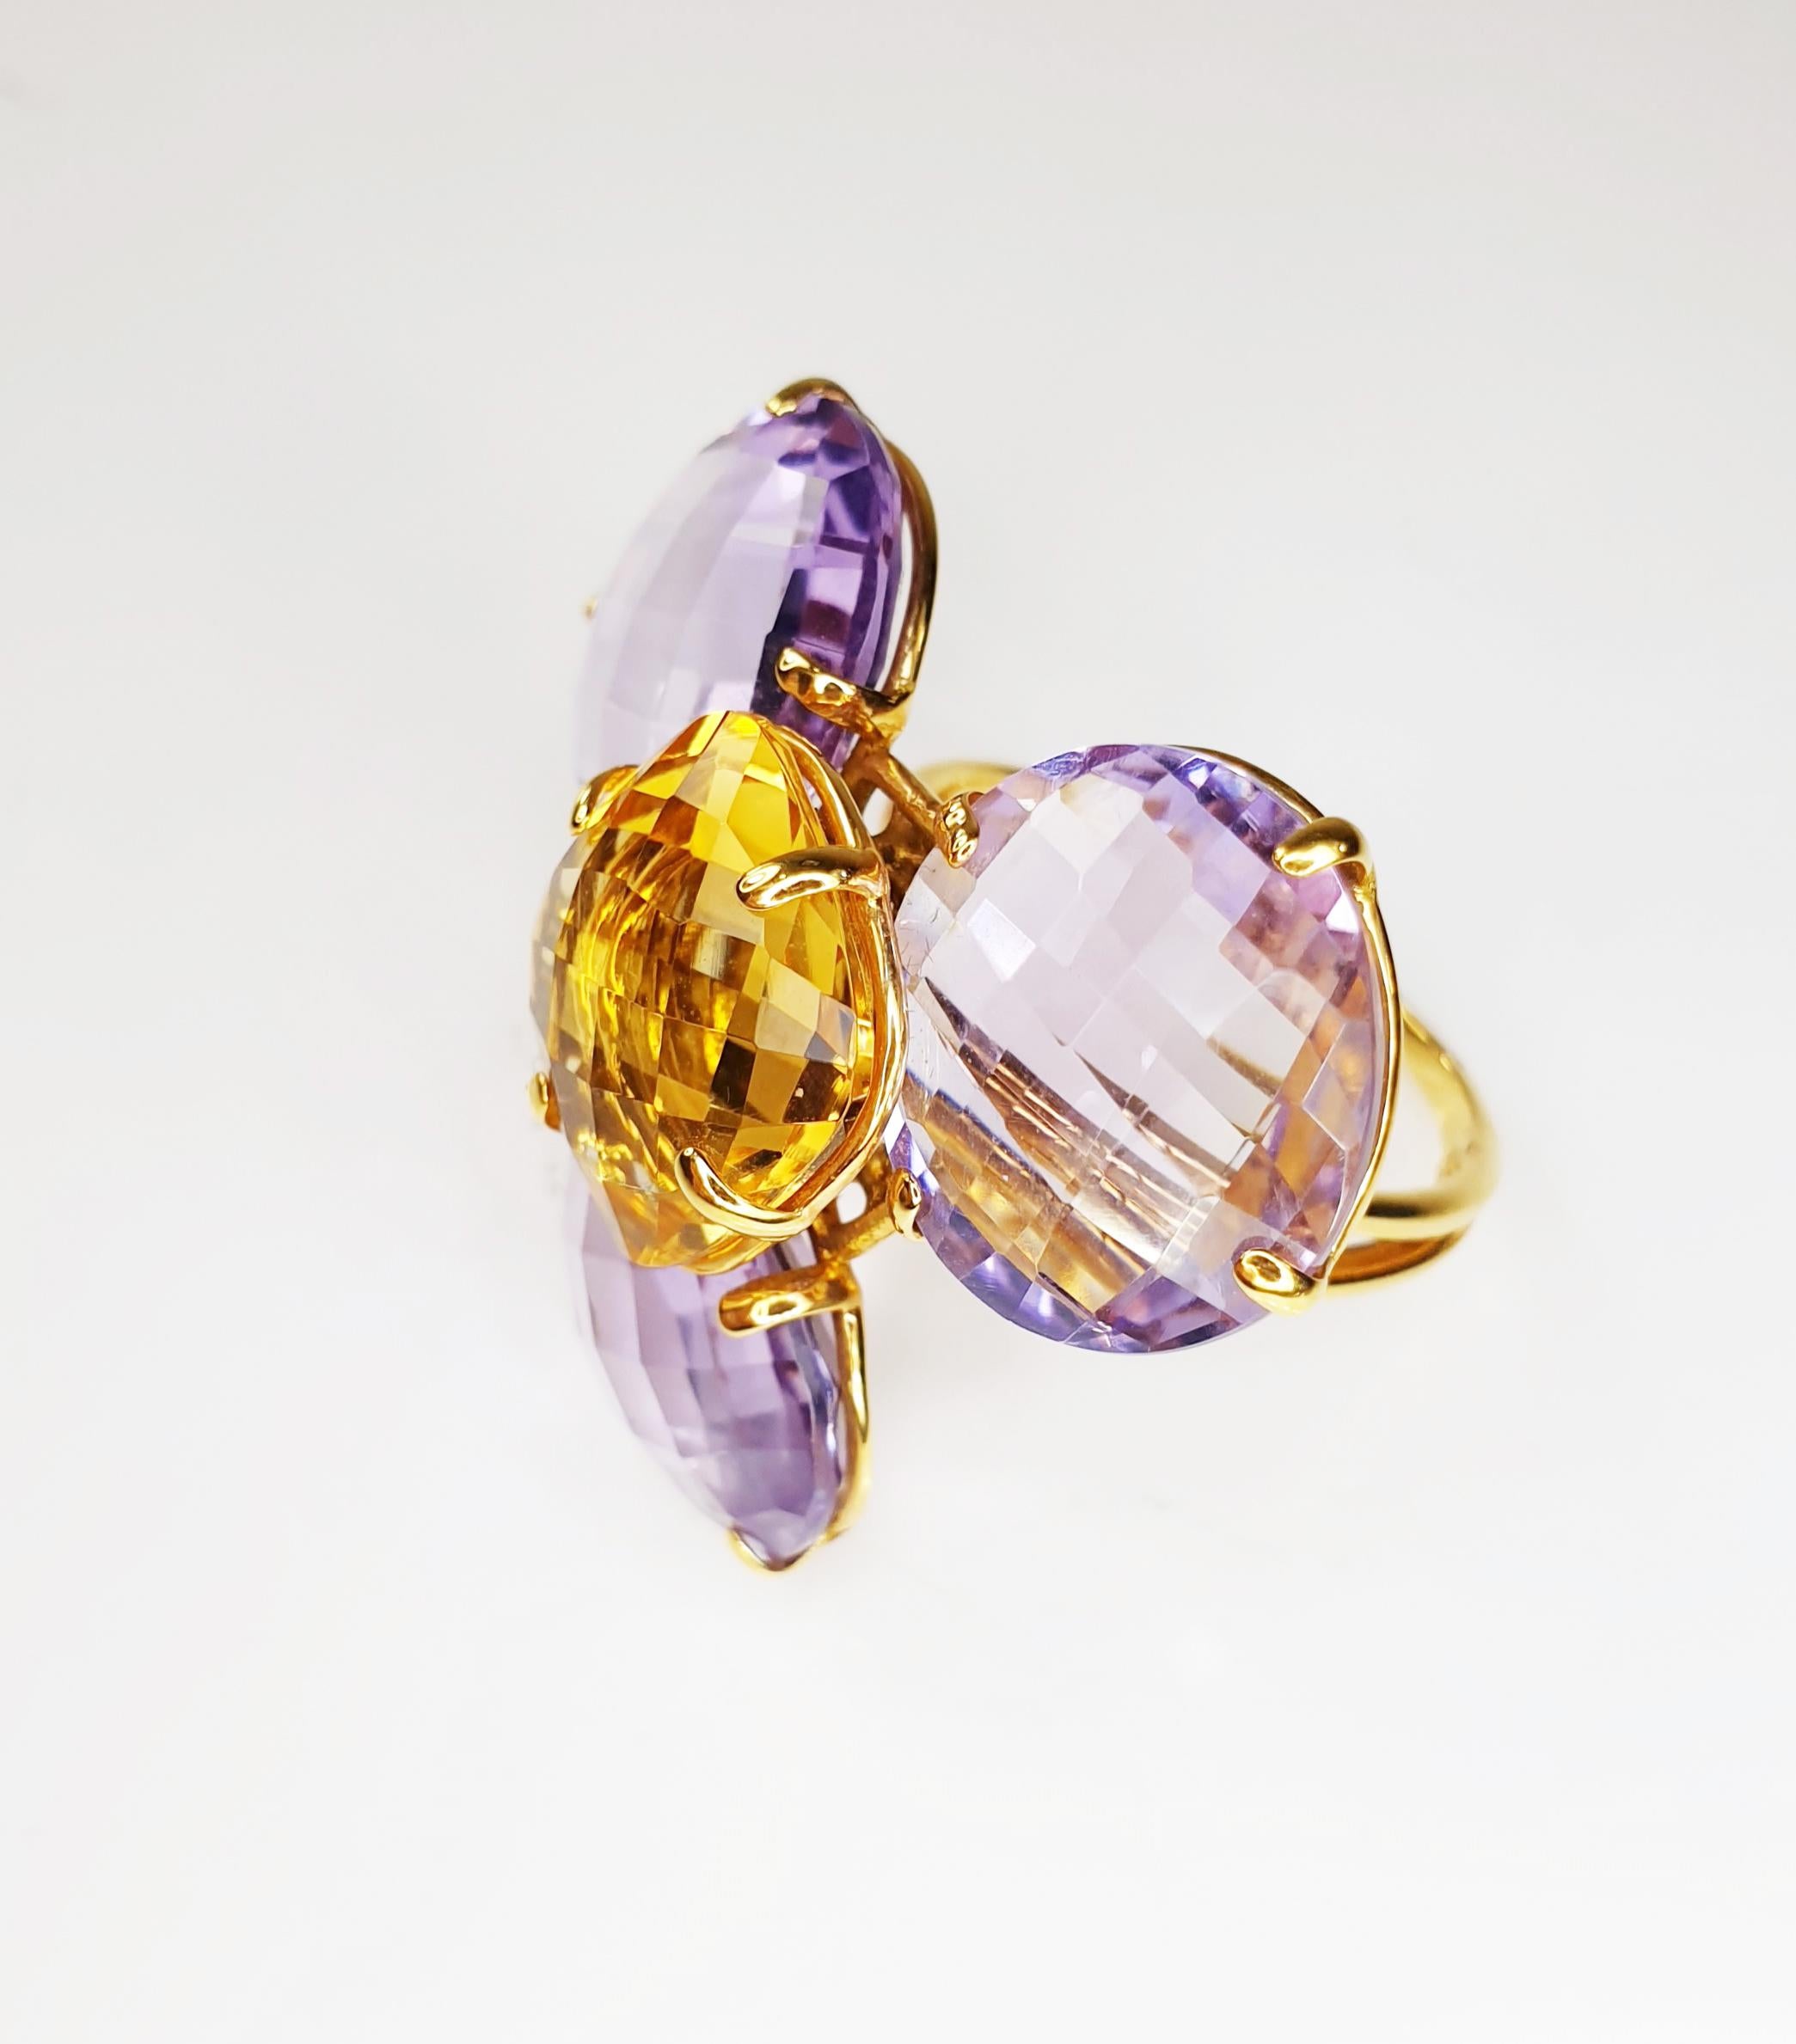 Multifaceted flower ring with central citrine and three amethysts 
Irama Pradera is a Young designer from Spain that searches always for the best gems and combines classic with contemporary mounting and styles. 
The harp is the second biggest string